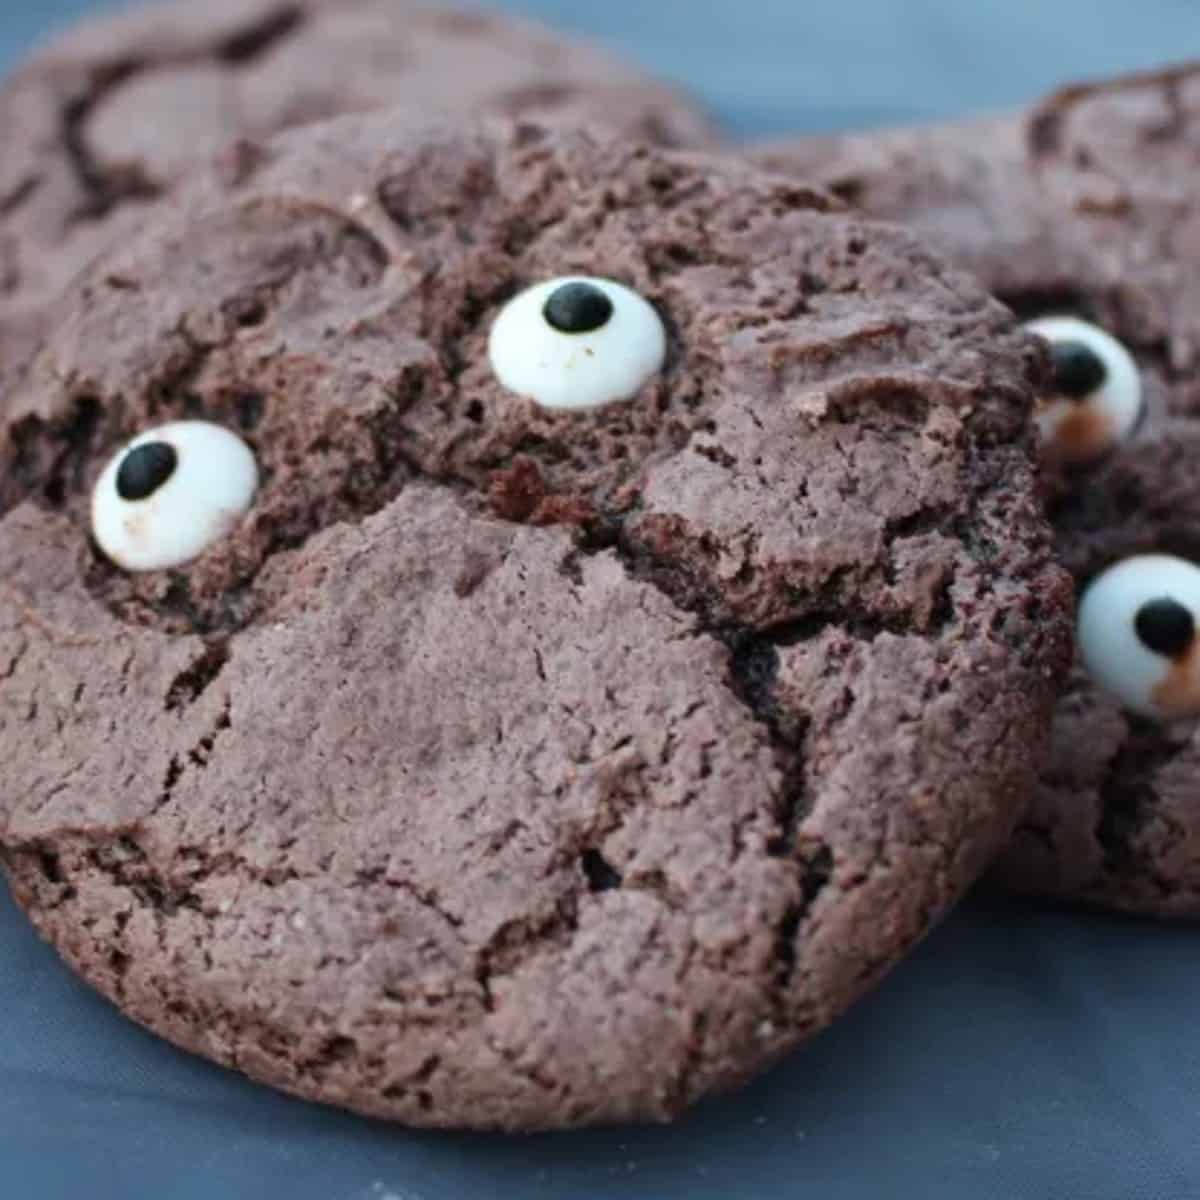 A rustic wooden table spread with a variety of monster eye cookies, each with its own unique personality and googly eye expression